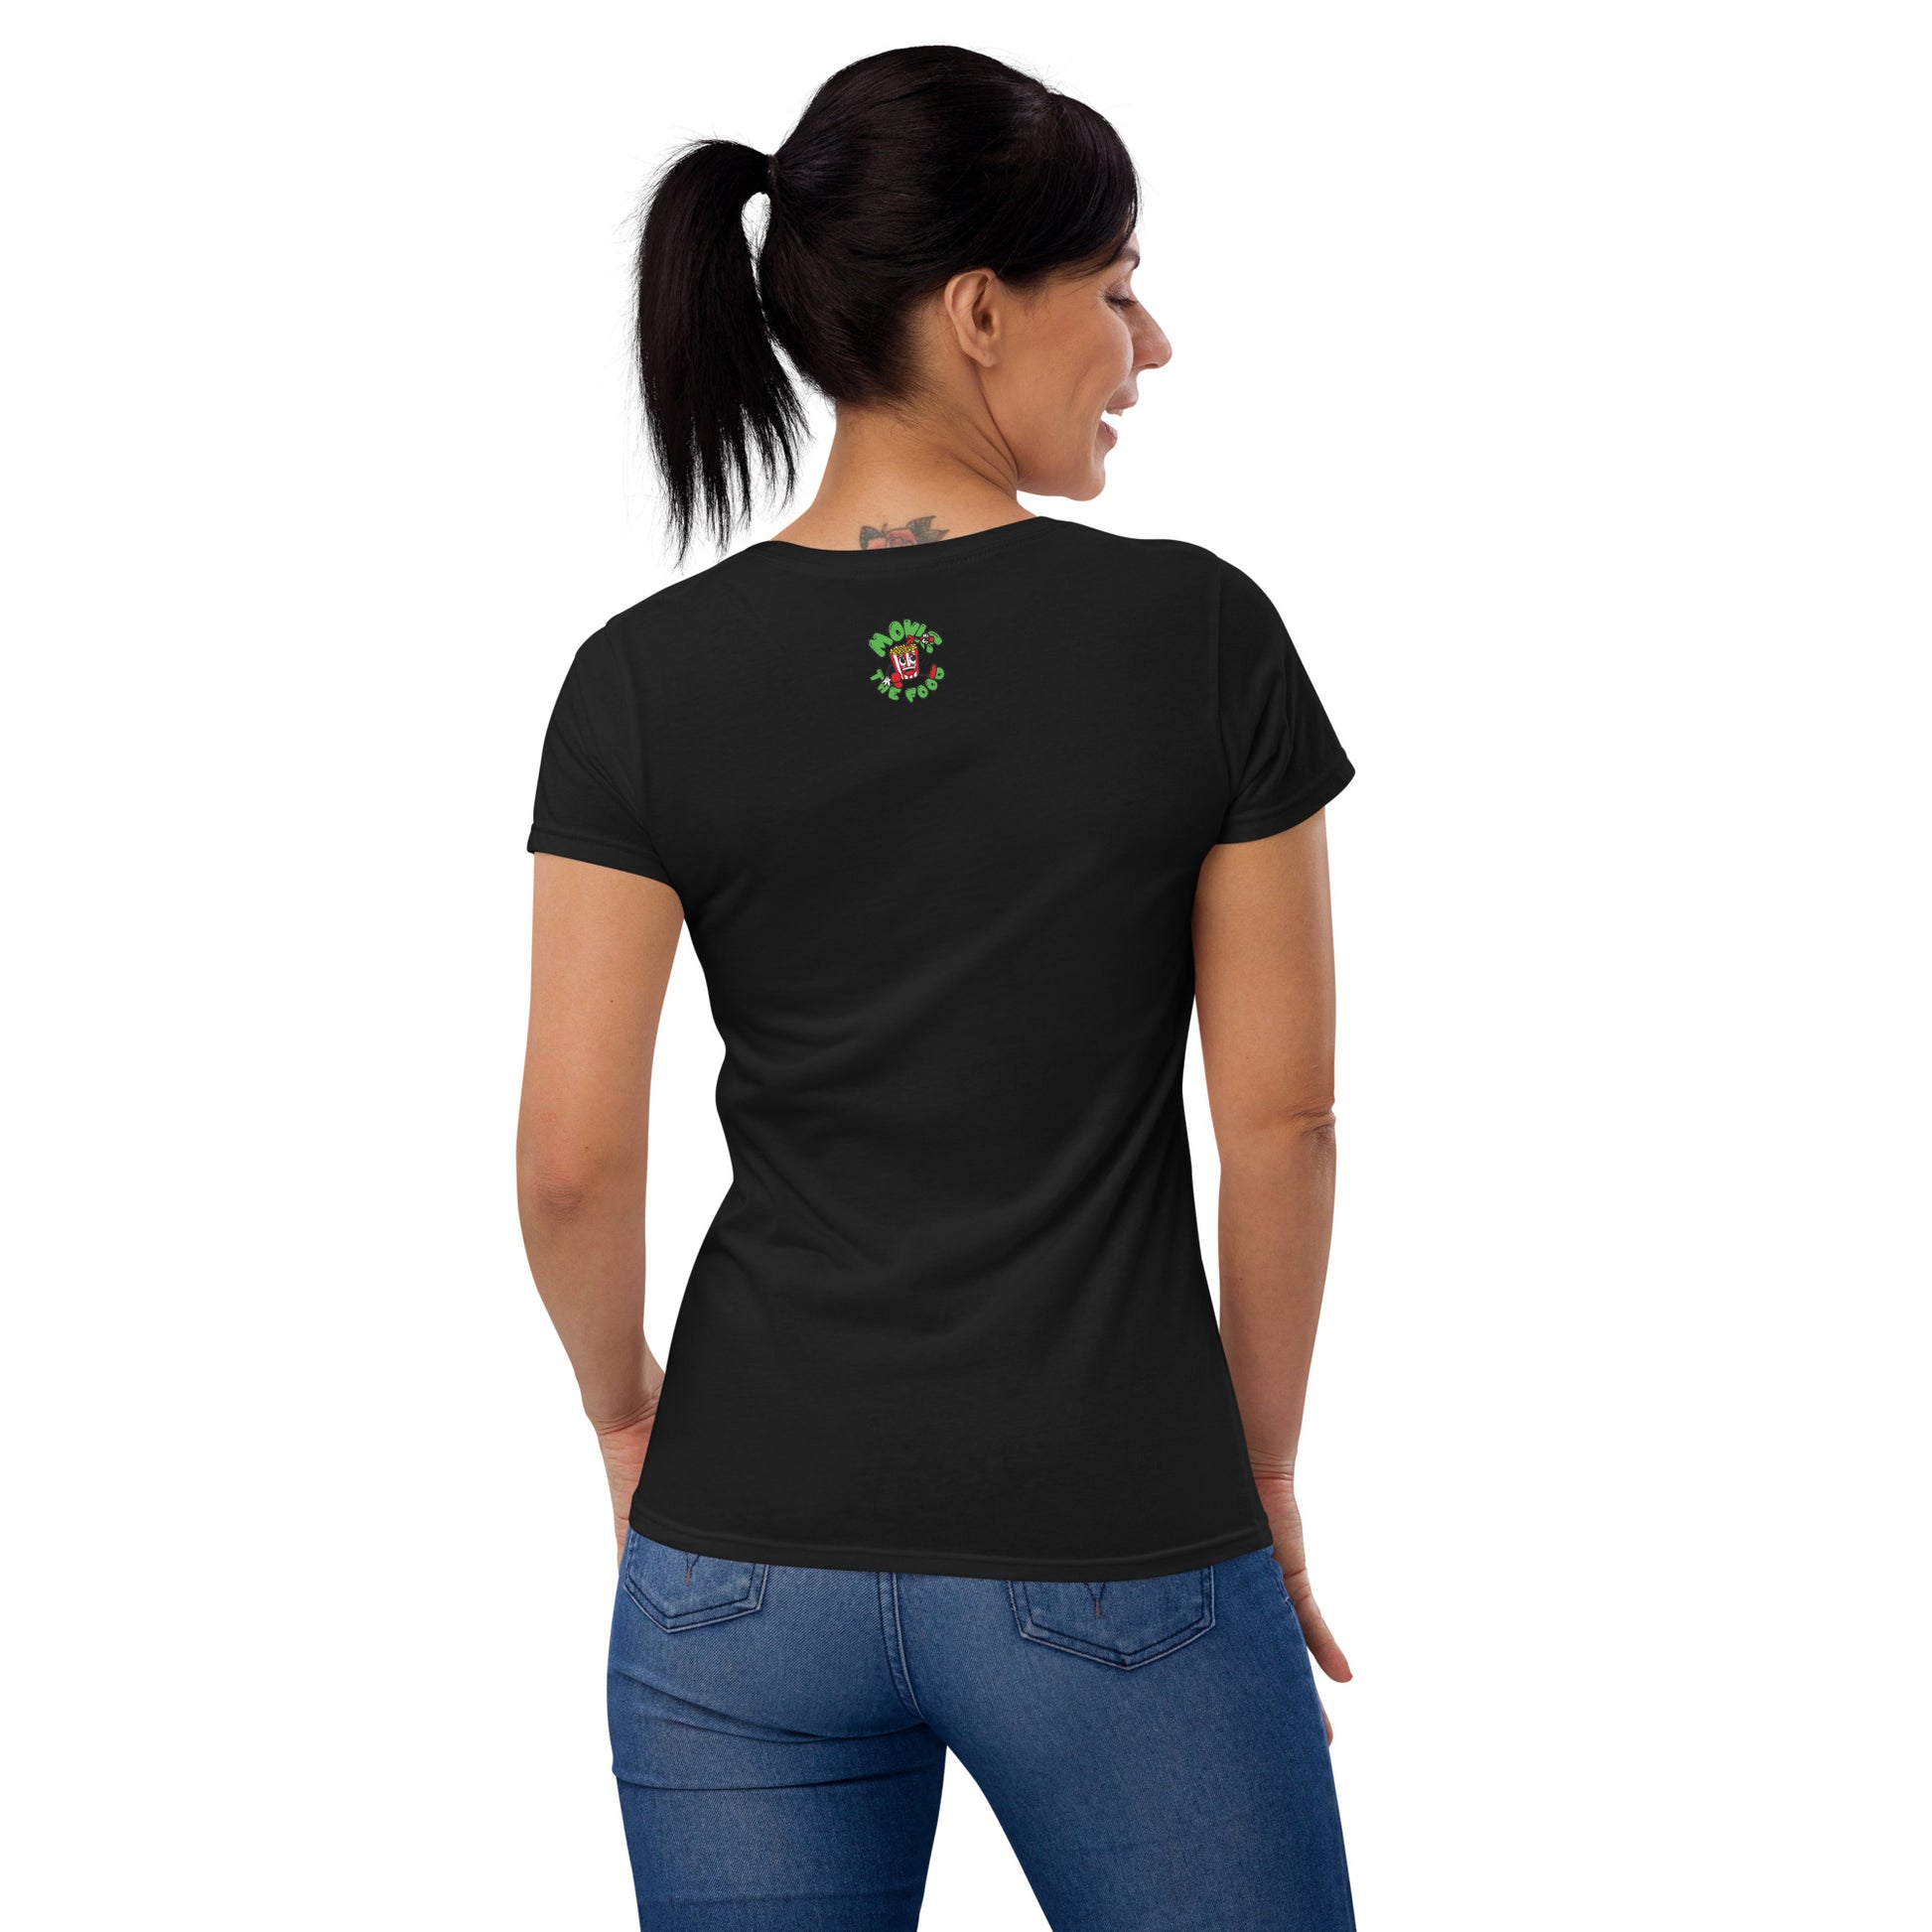 Movie The Food -  Toastbusters Women's T-Shirt - Black - Model Back